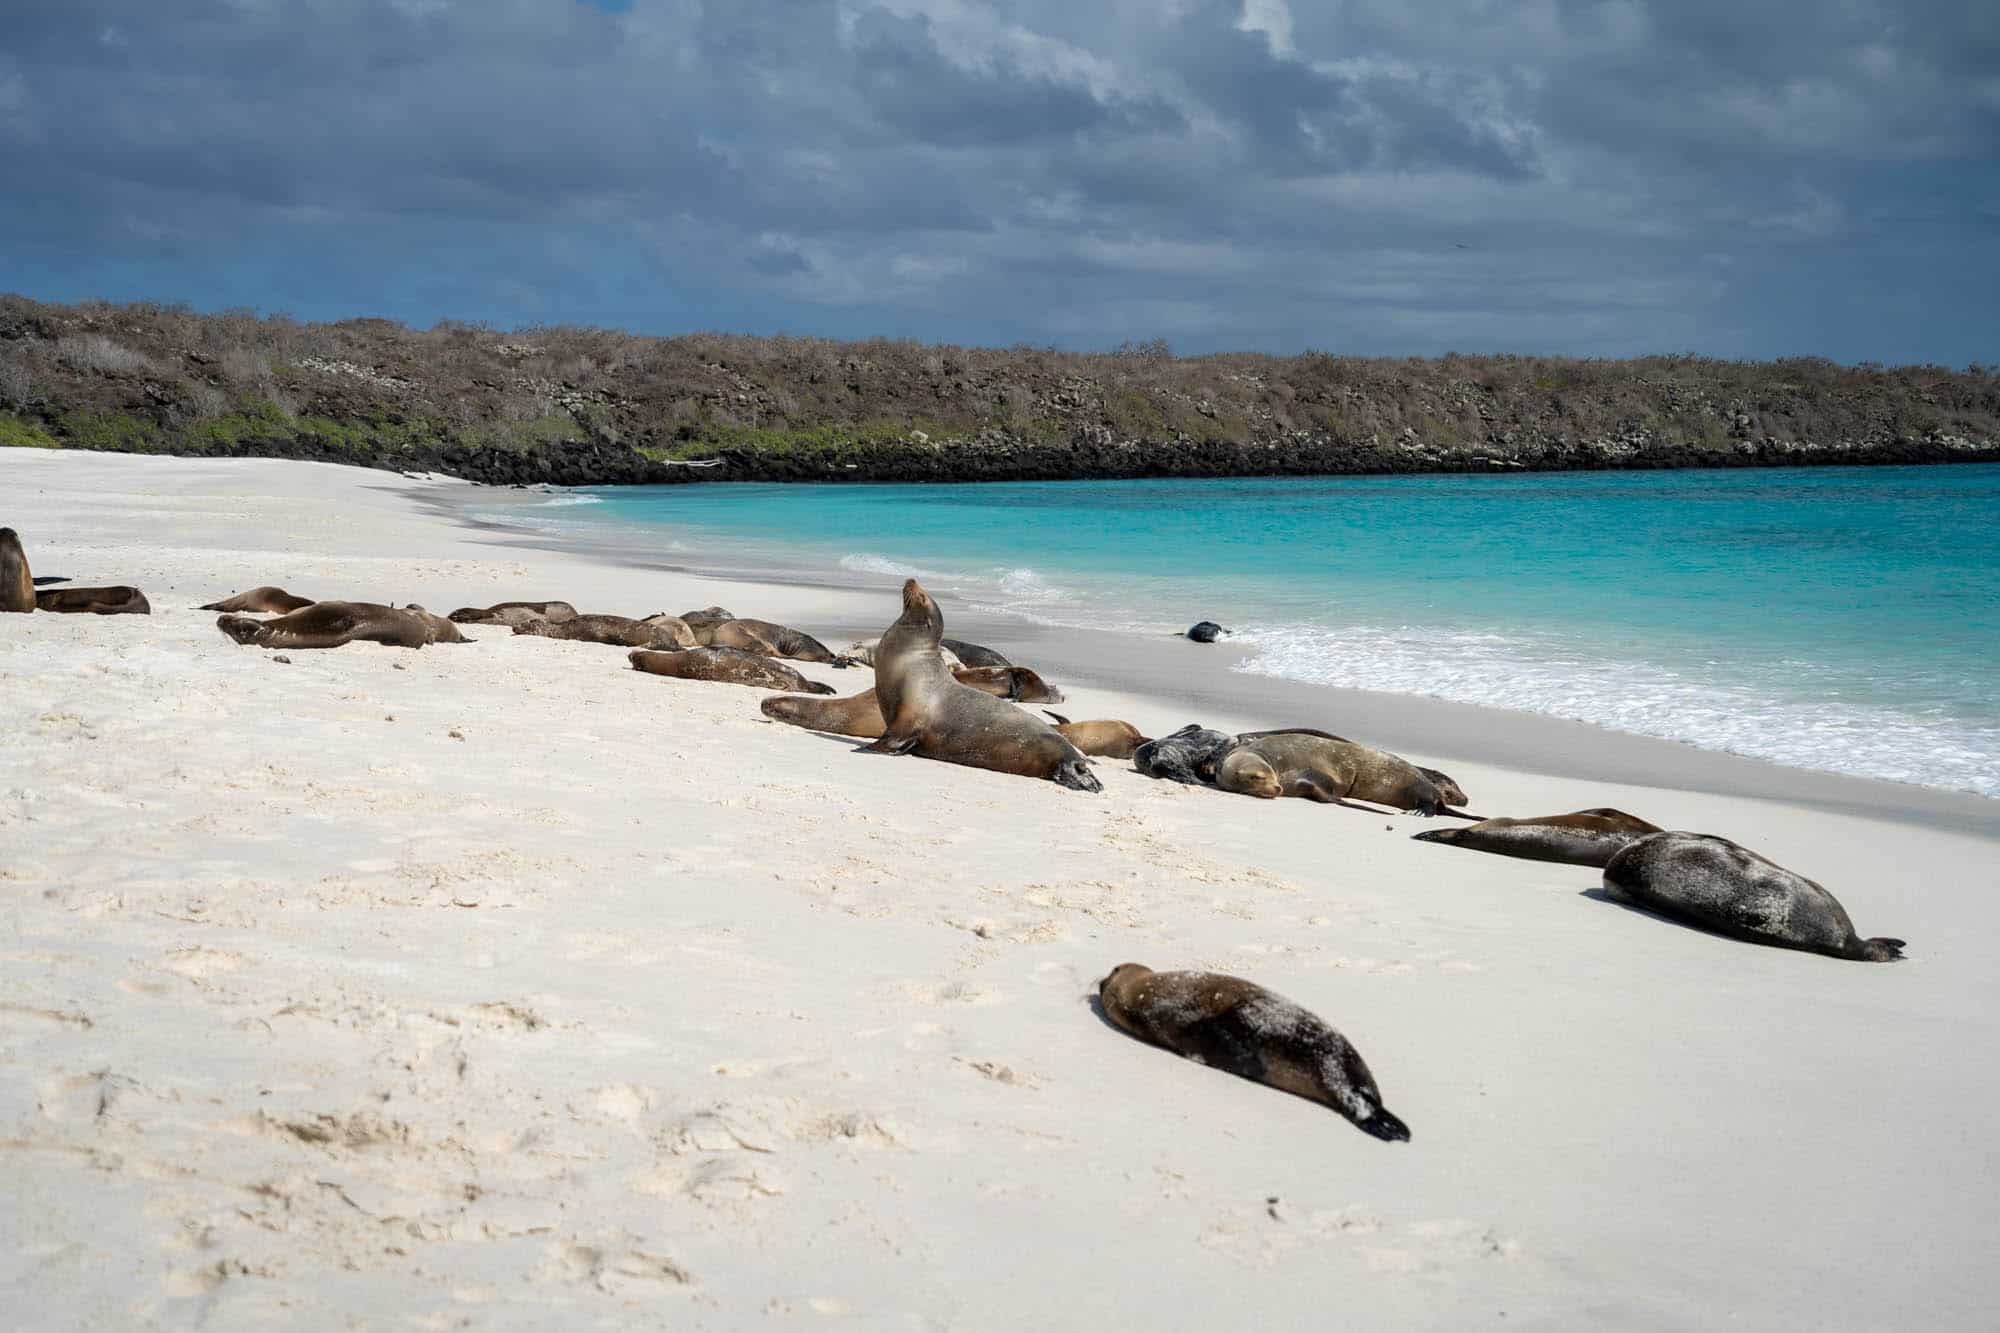 Galapagos Islands beach with sea lions